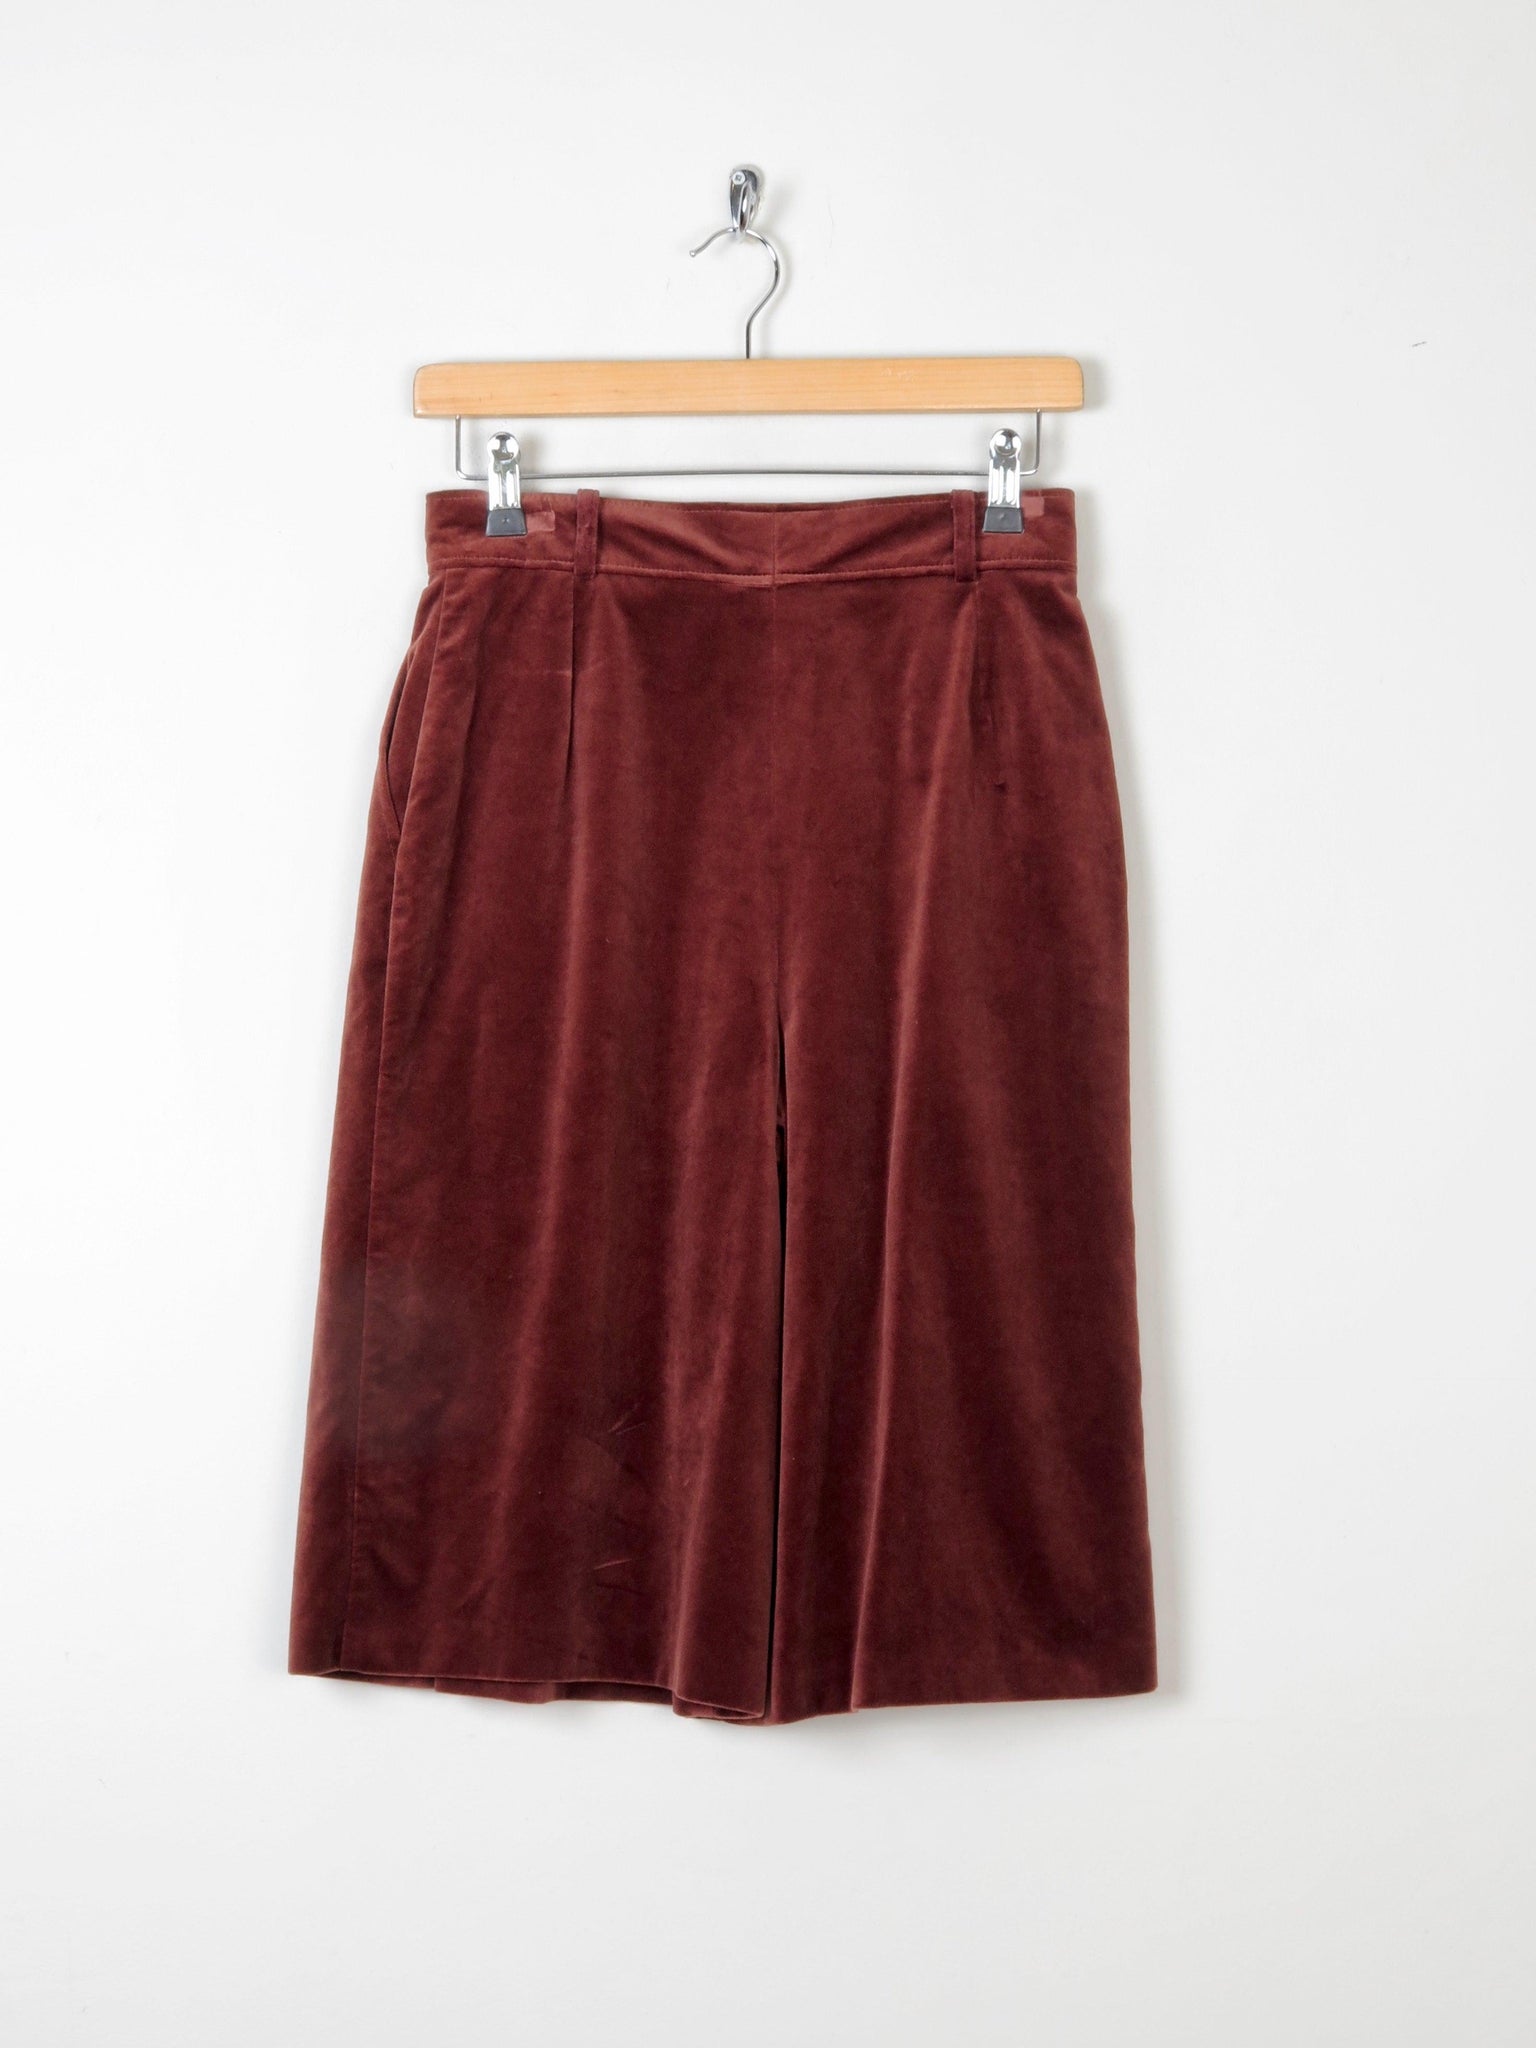 Women's Rust Velvet Culottes Long Shorts 27" 8 Approx - The Harlequin